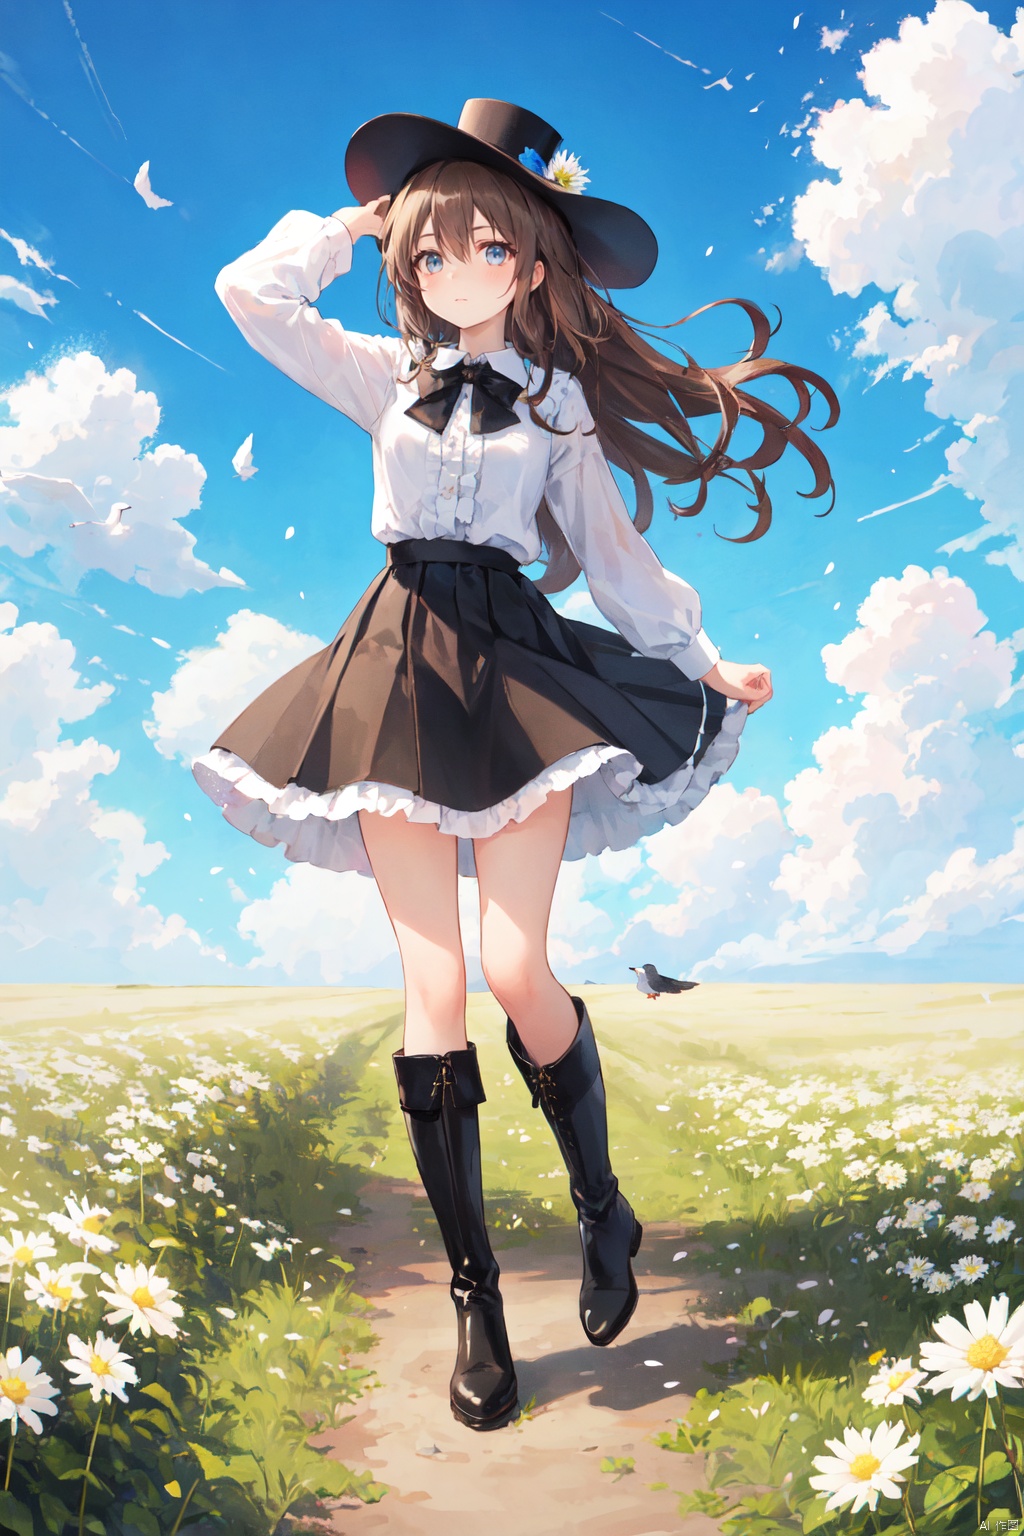 1girl, bangs, bird, black_footwear, black_headwear, blue_flower, blue_sky, blush, boots, bouquet, bow, brown_eyes, brown_hair, cloud, cloudy_sky, daisy, dandelion, day, dove, eyebrows_visible_through_hair, field, flower, flower_field, frills, full_body, hair_between_eyes, hat, holding_flower, knee_boots, leaf, leaves_in_wind, lily_\(flower\), long_hair, long_sleeves, looking_at_viewer, mini_hat, mini_top_hat, petals, shirt, skirt, sky, solo, standing, top_hat, very_long_hair, white_flower, white_rose, white_shirt, yellow_flower